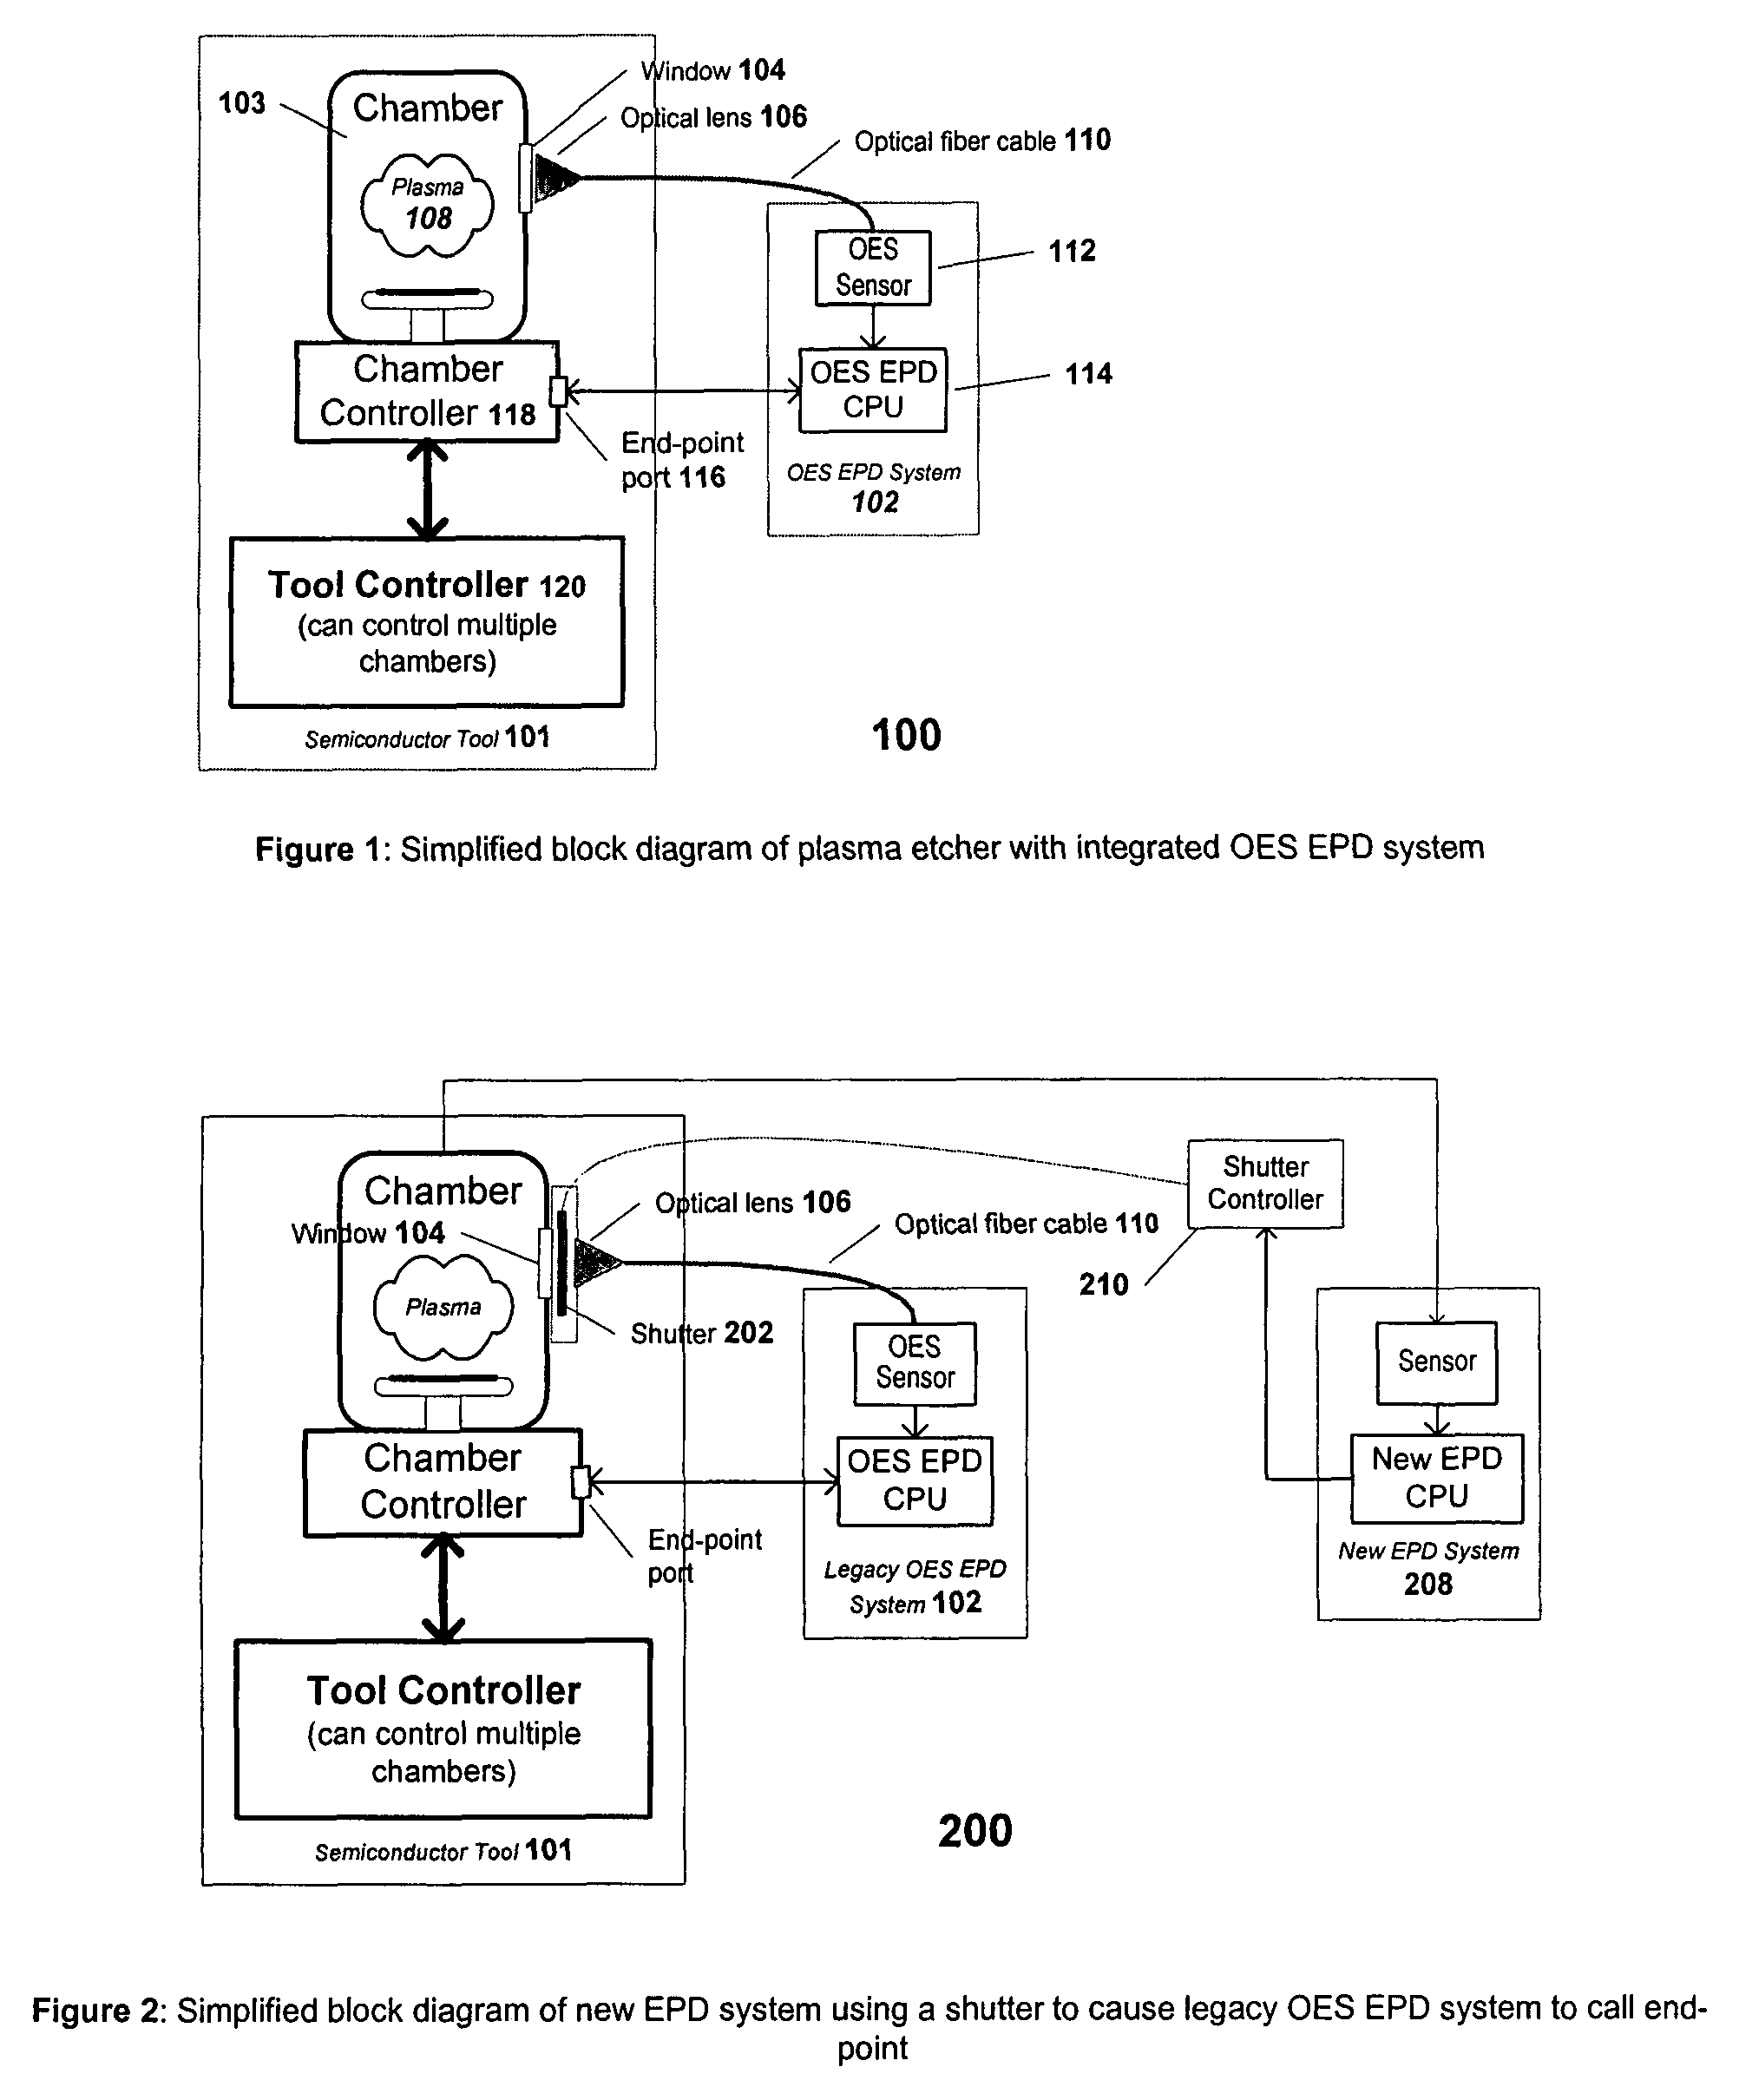 System and method for controlling process end-point utilizing legacy end-point system